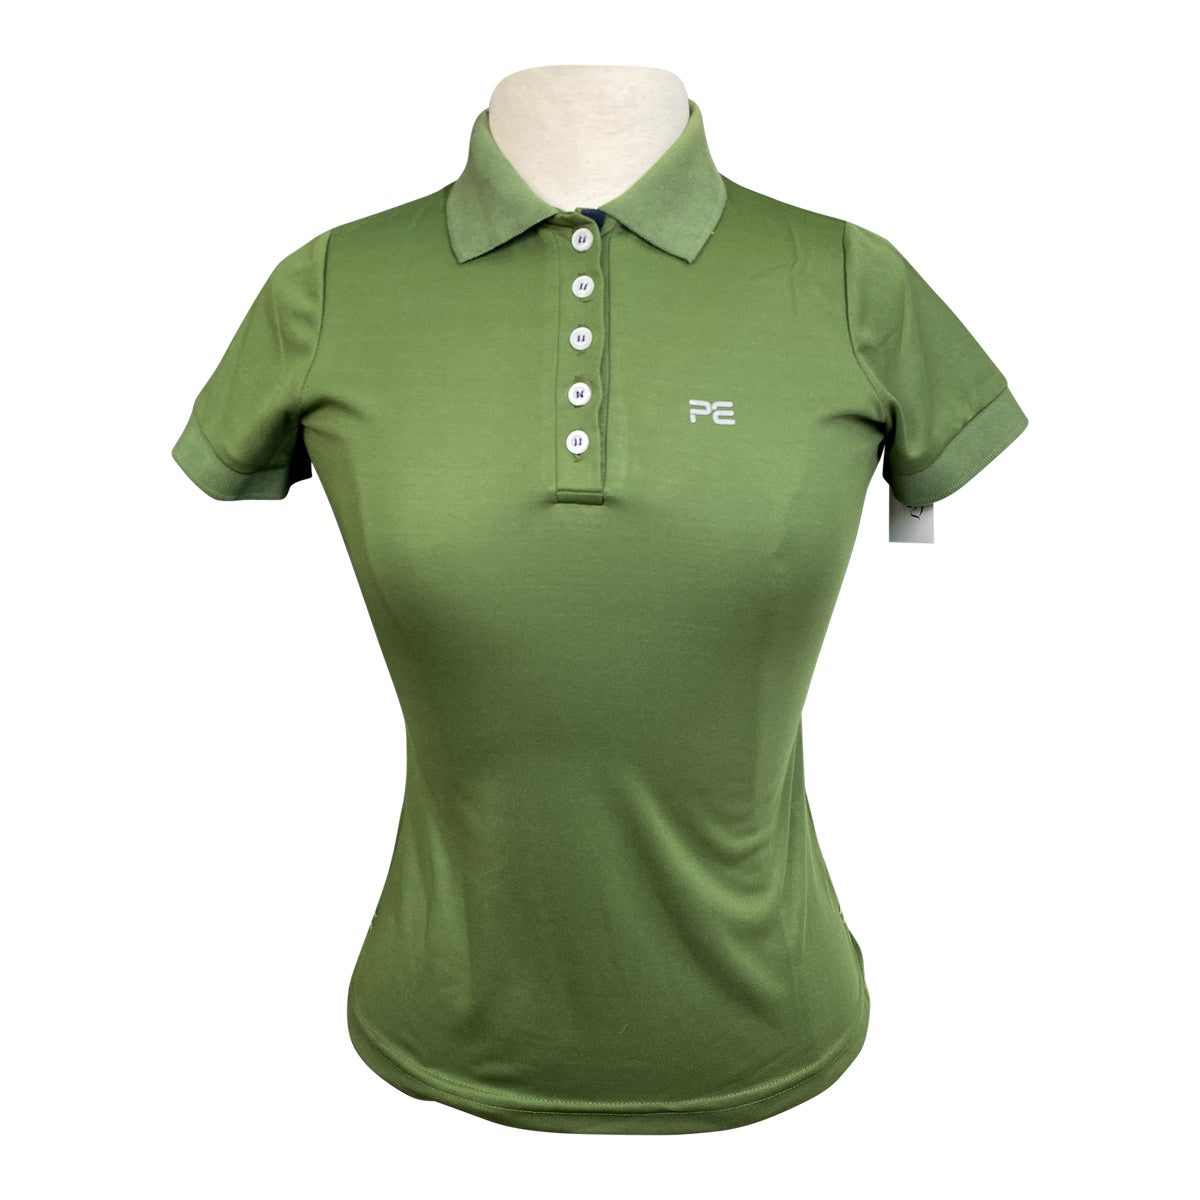 Premier Equine Polo Shirt in Green